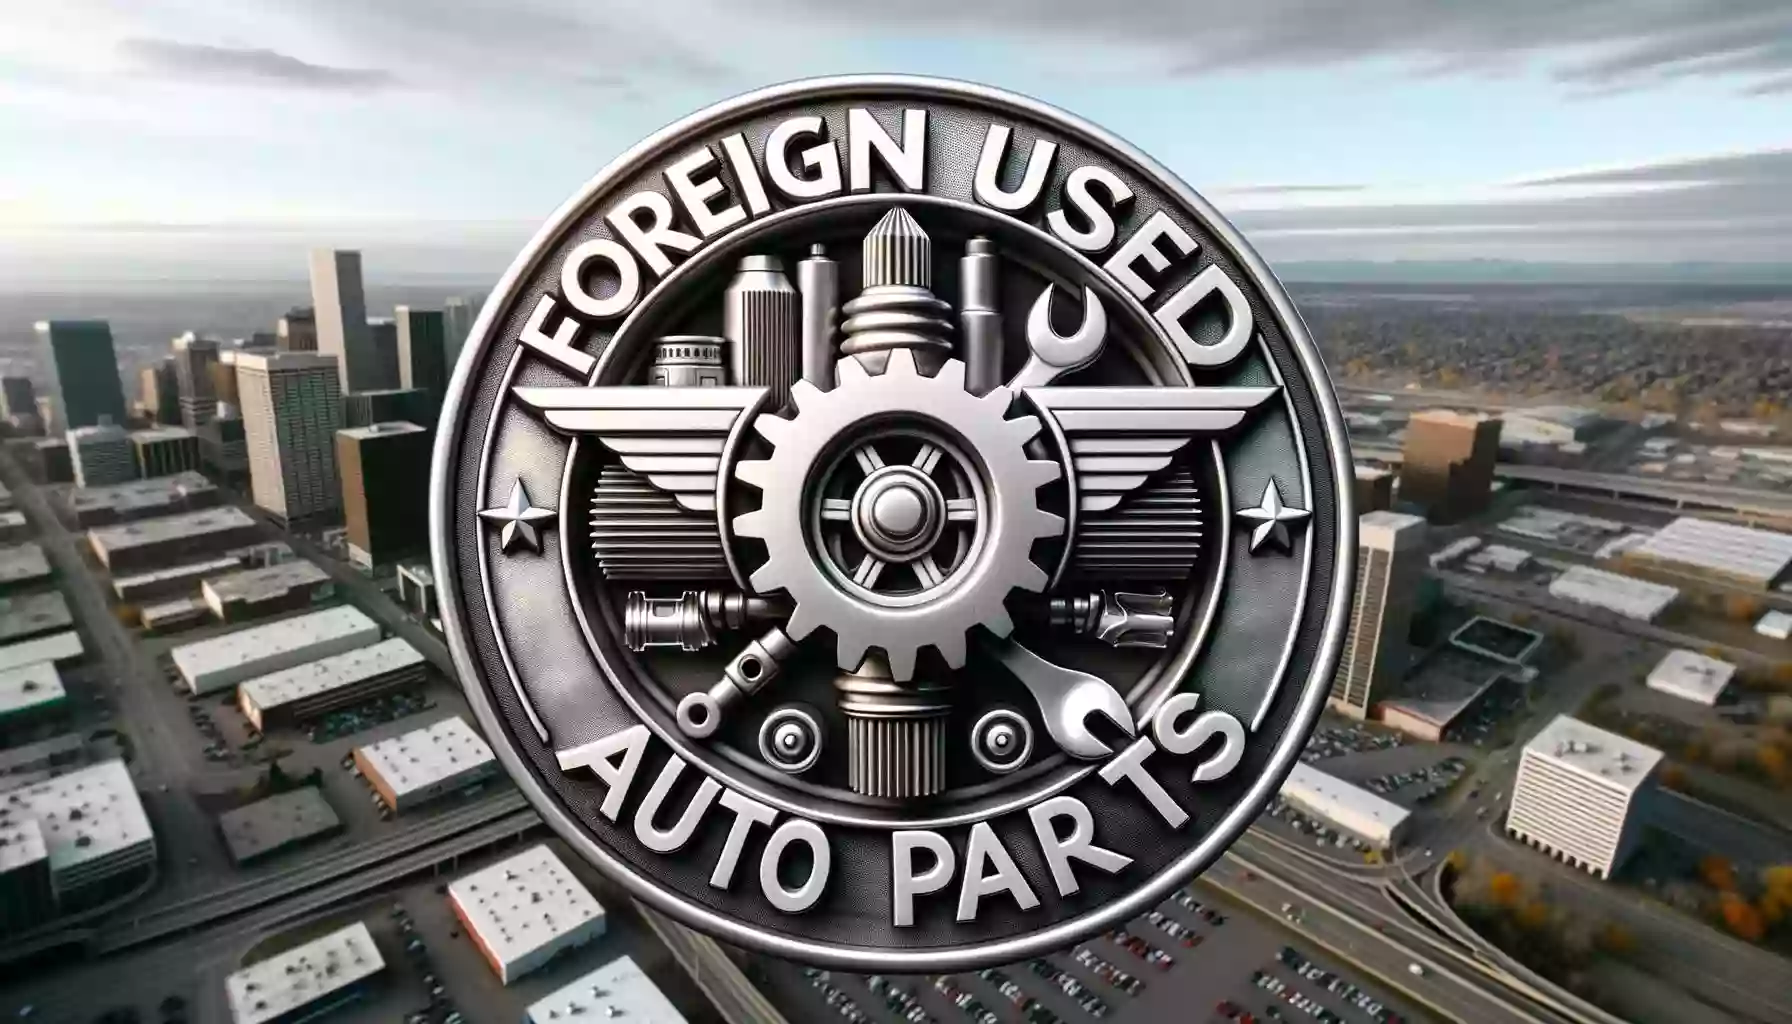 Foreign Used Auto Parts INC